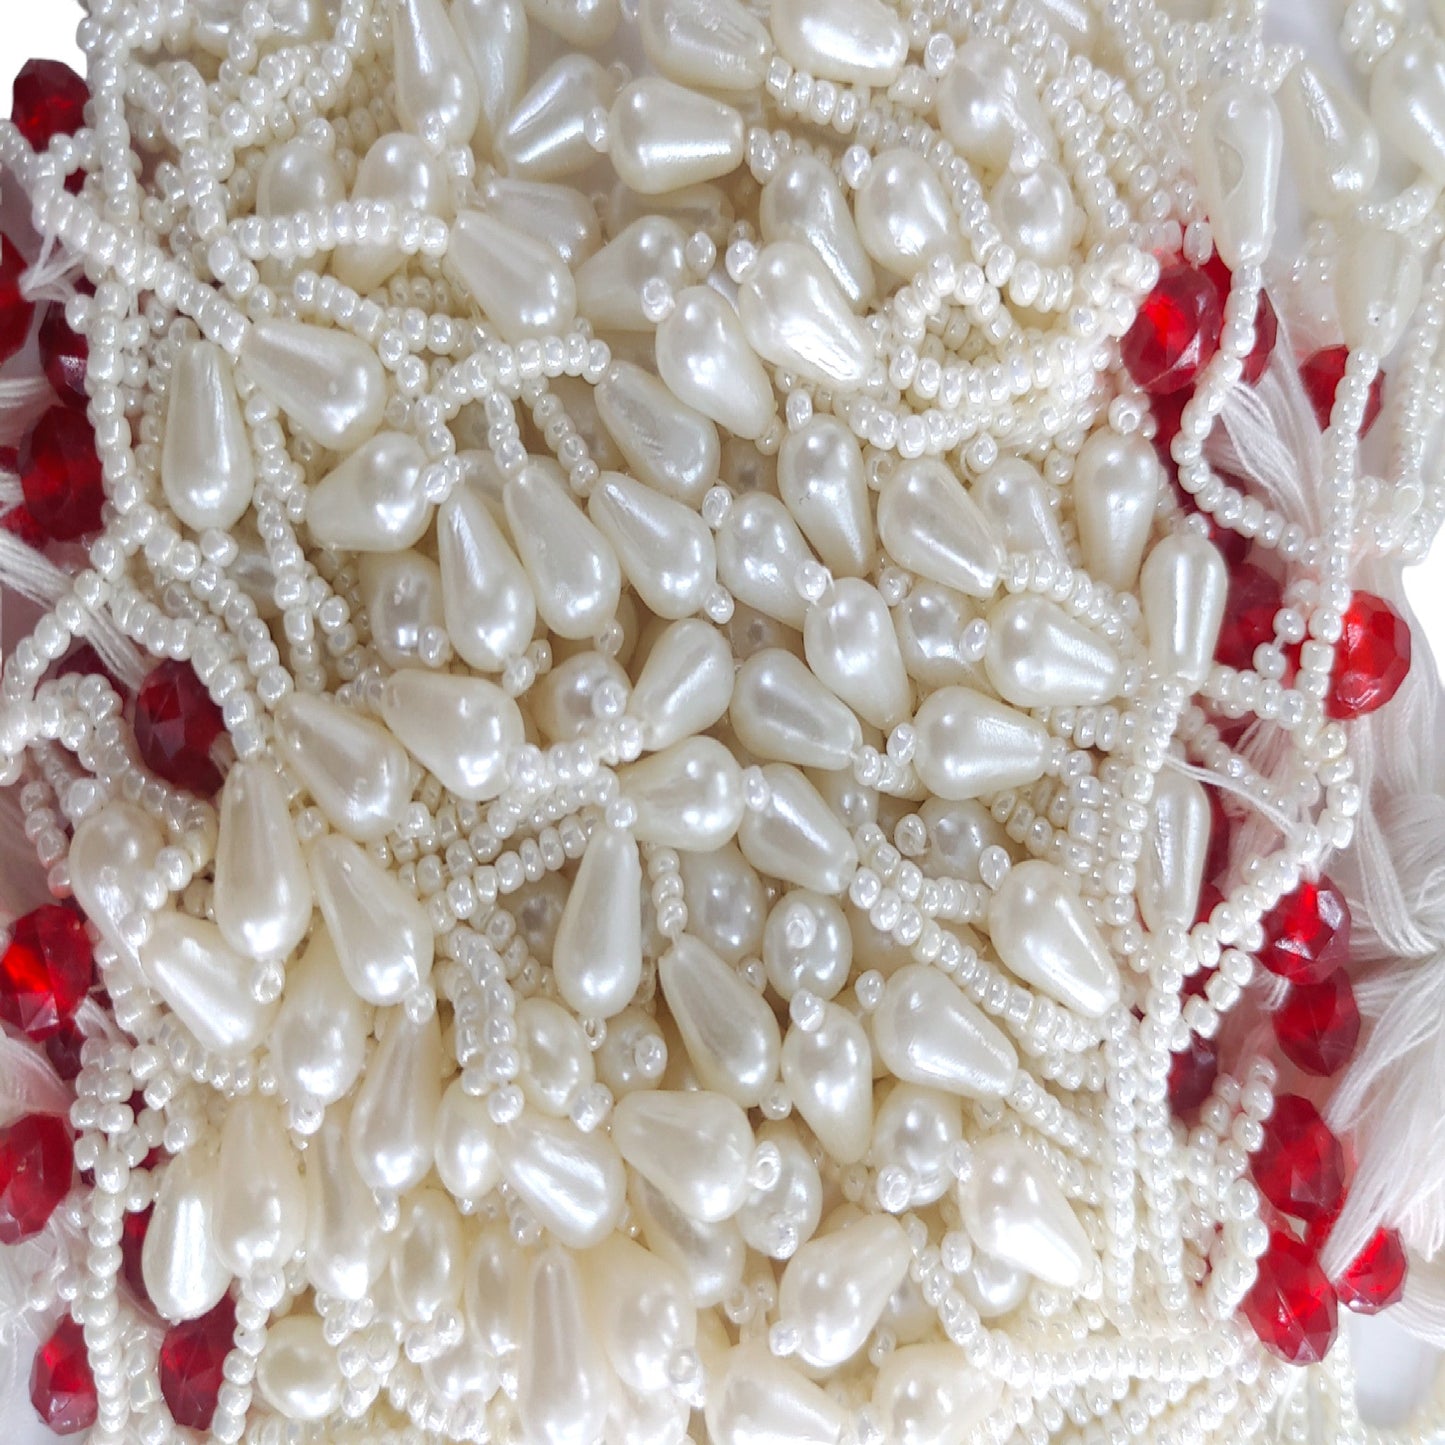 Indian Petals - Seed Beads and Glass Beads Multi Purpose Fringe Tassel with Pearl Drop for DIY Craft Jewelry Textile or Decor, White Seed Beads and Glass Beads Multi Purpose Fringe Tassel with Pearl Drop for DIY Craft Jewelry Textile or Decor, White - 100 Pieces